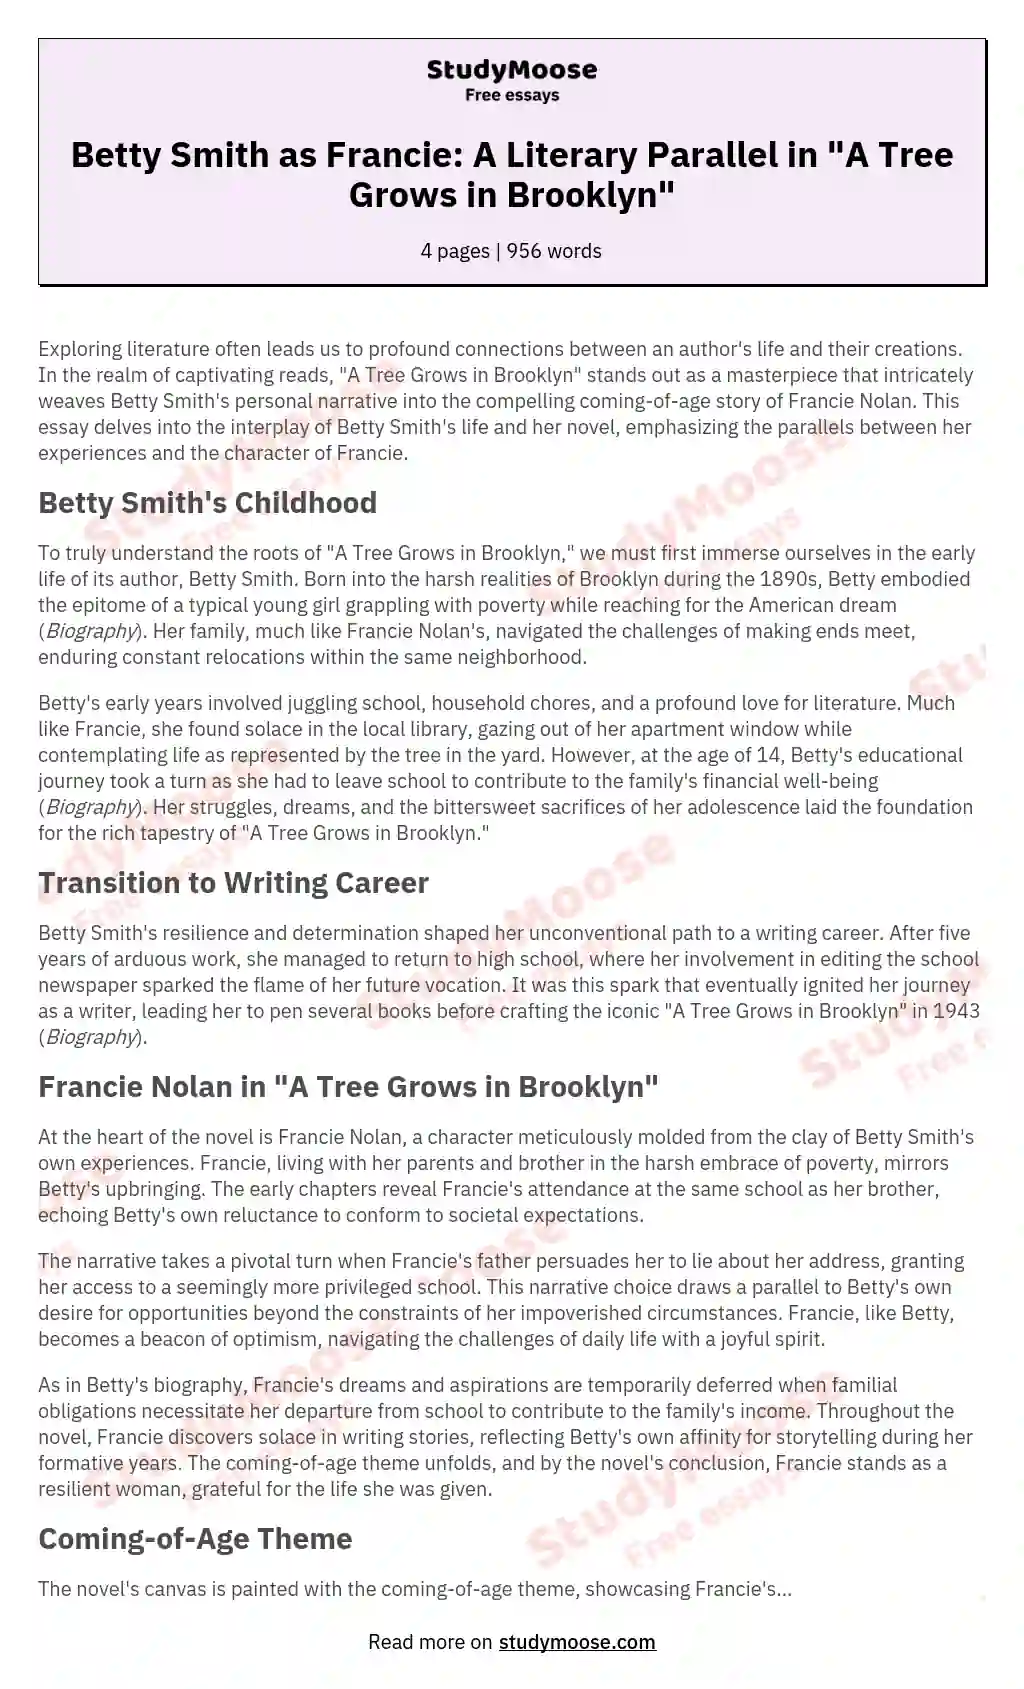 Betty Smith as Francie: A Literary Parallel in "A Tree Grows in Brooklyn" essay